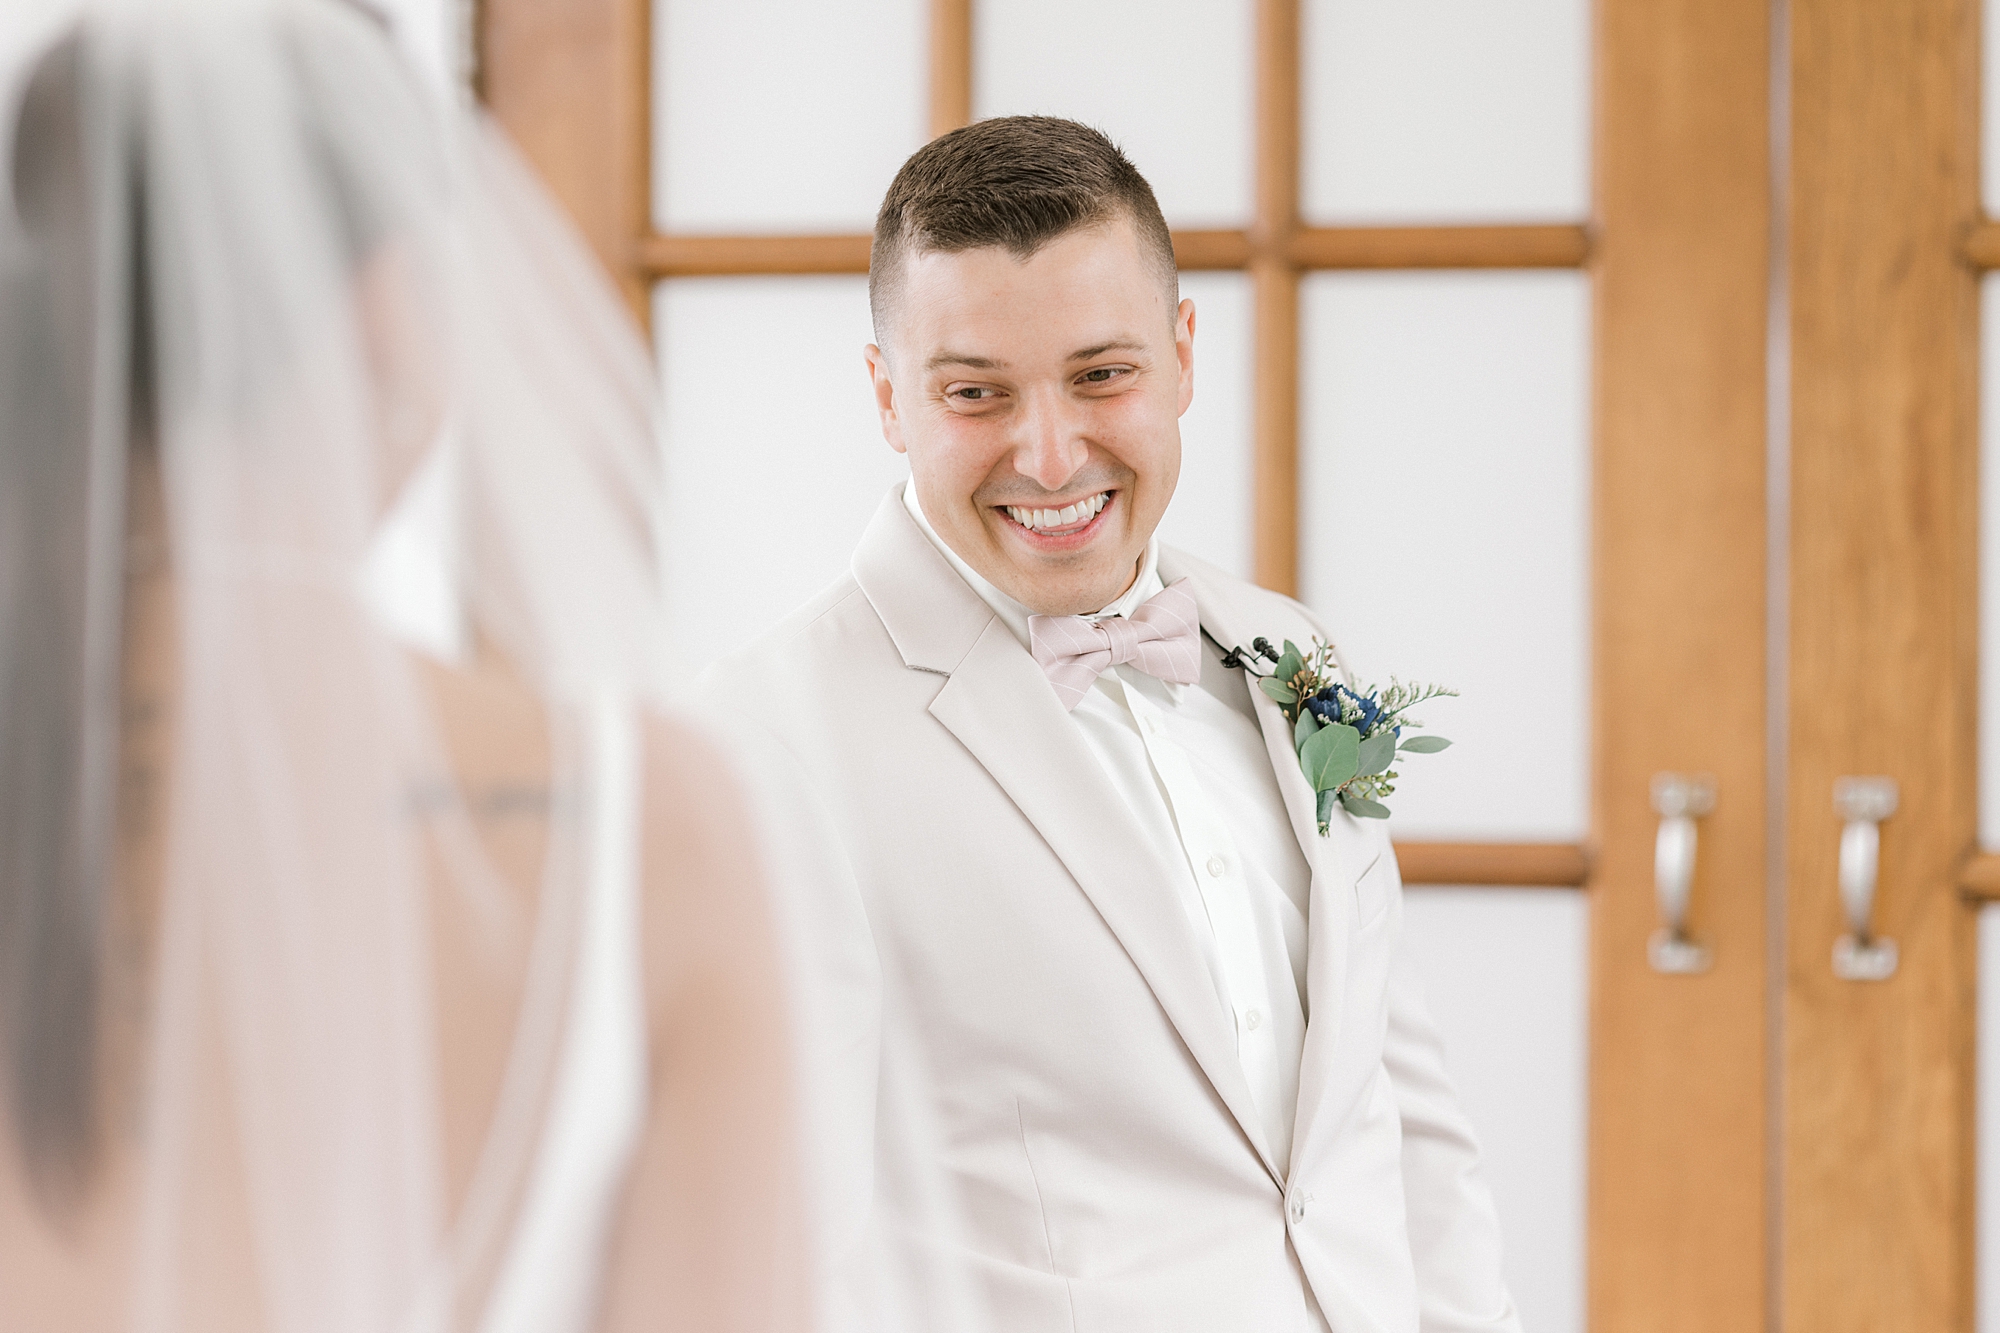 groom grins as he turns to look at bride during first look